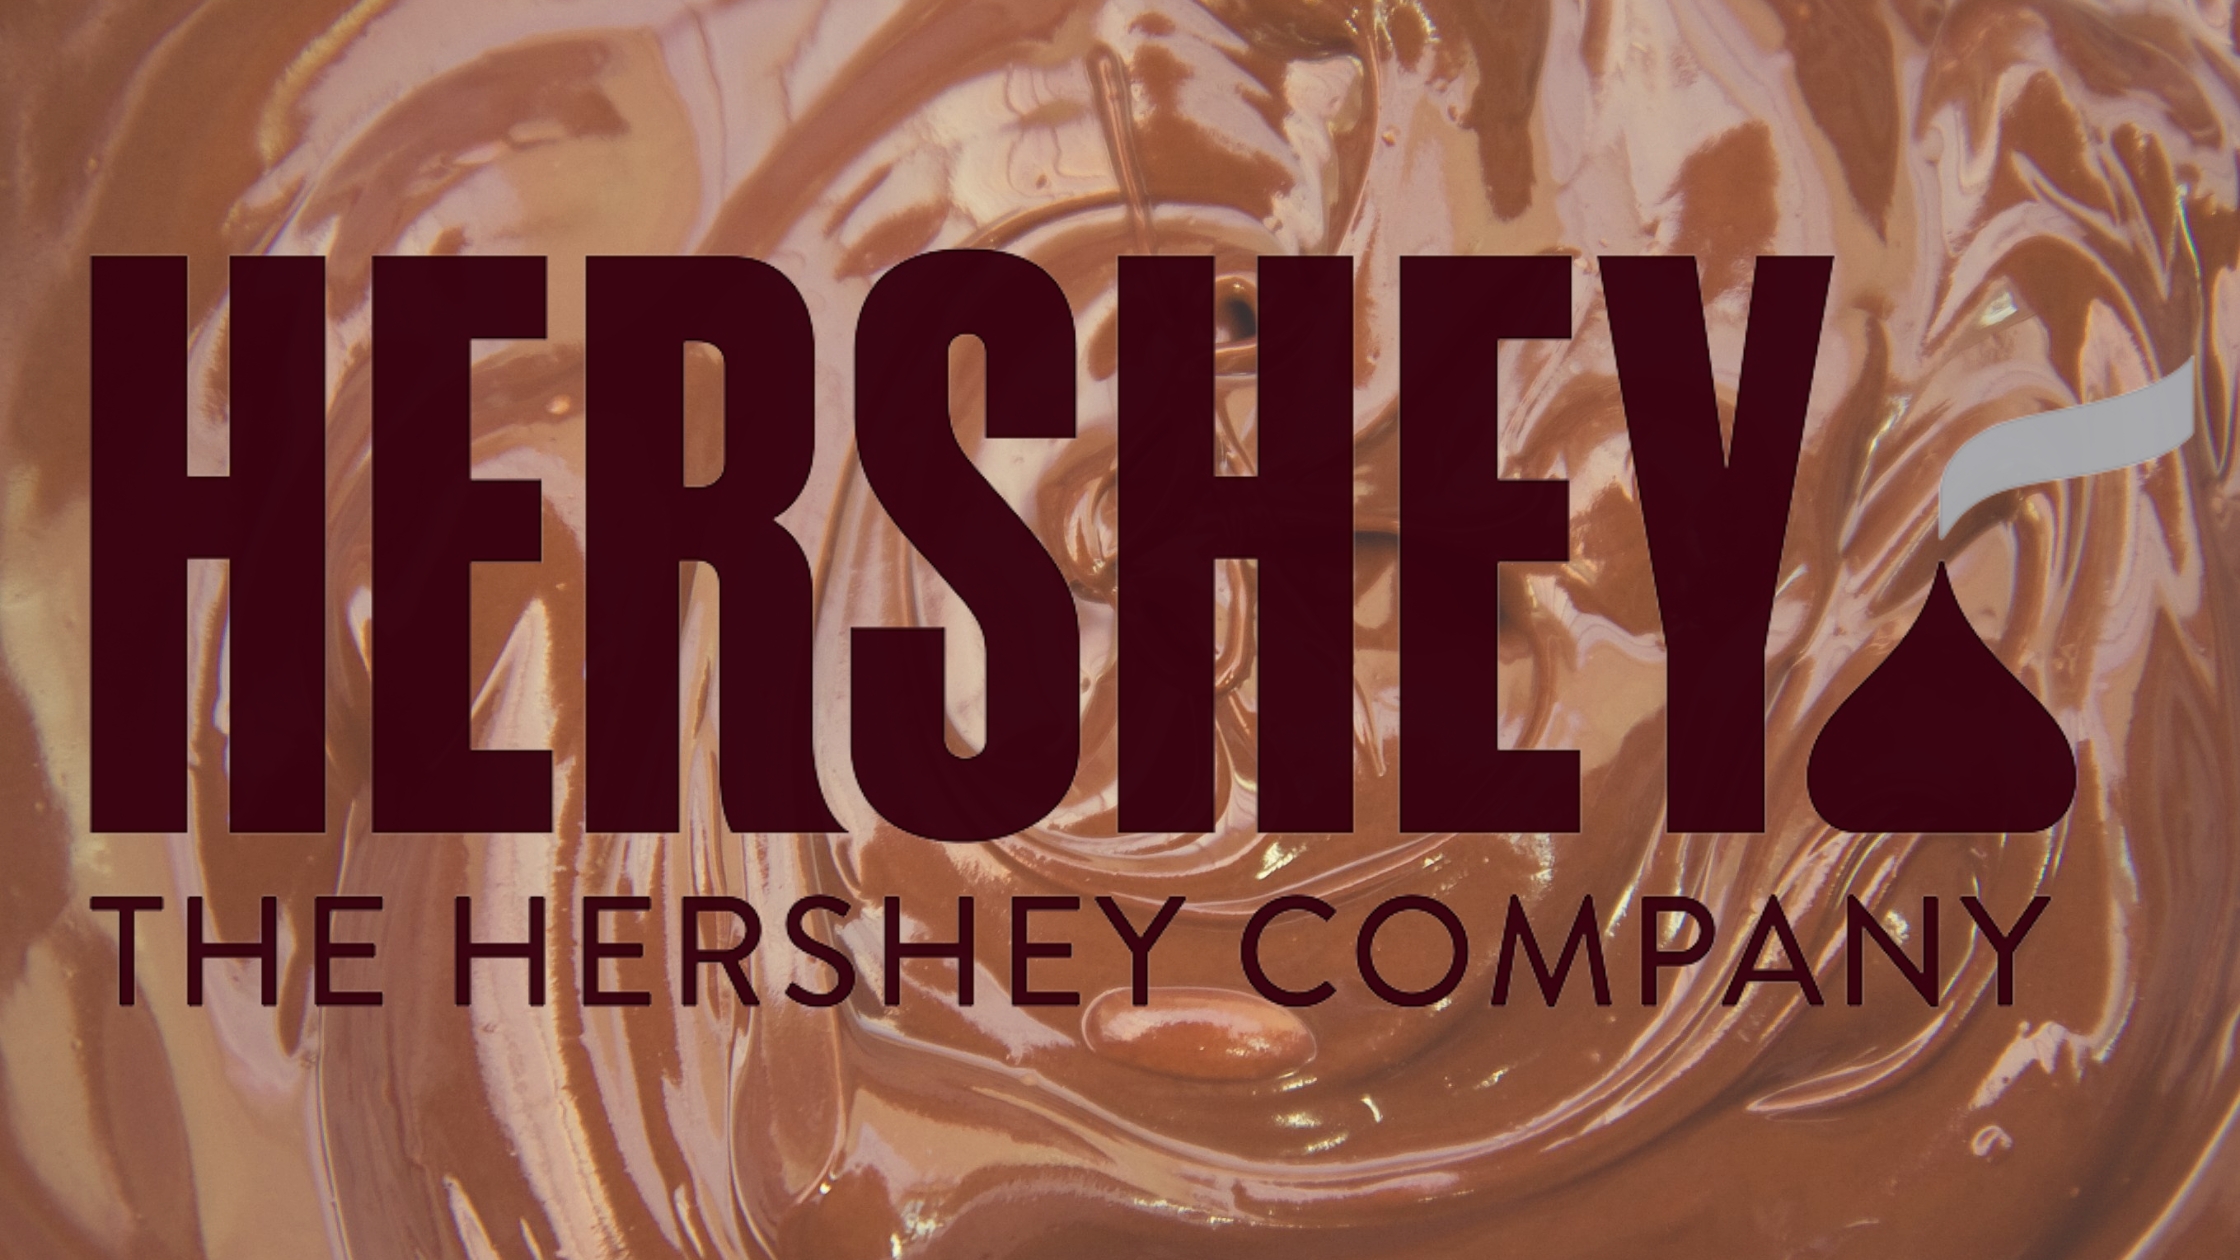 Hershey Photos and Images